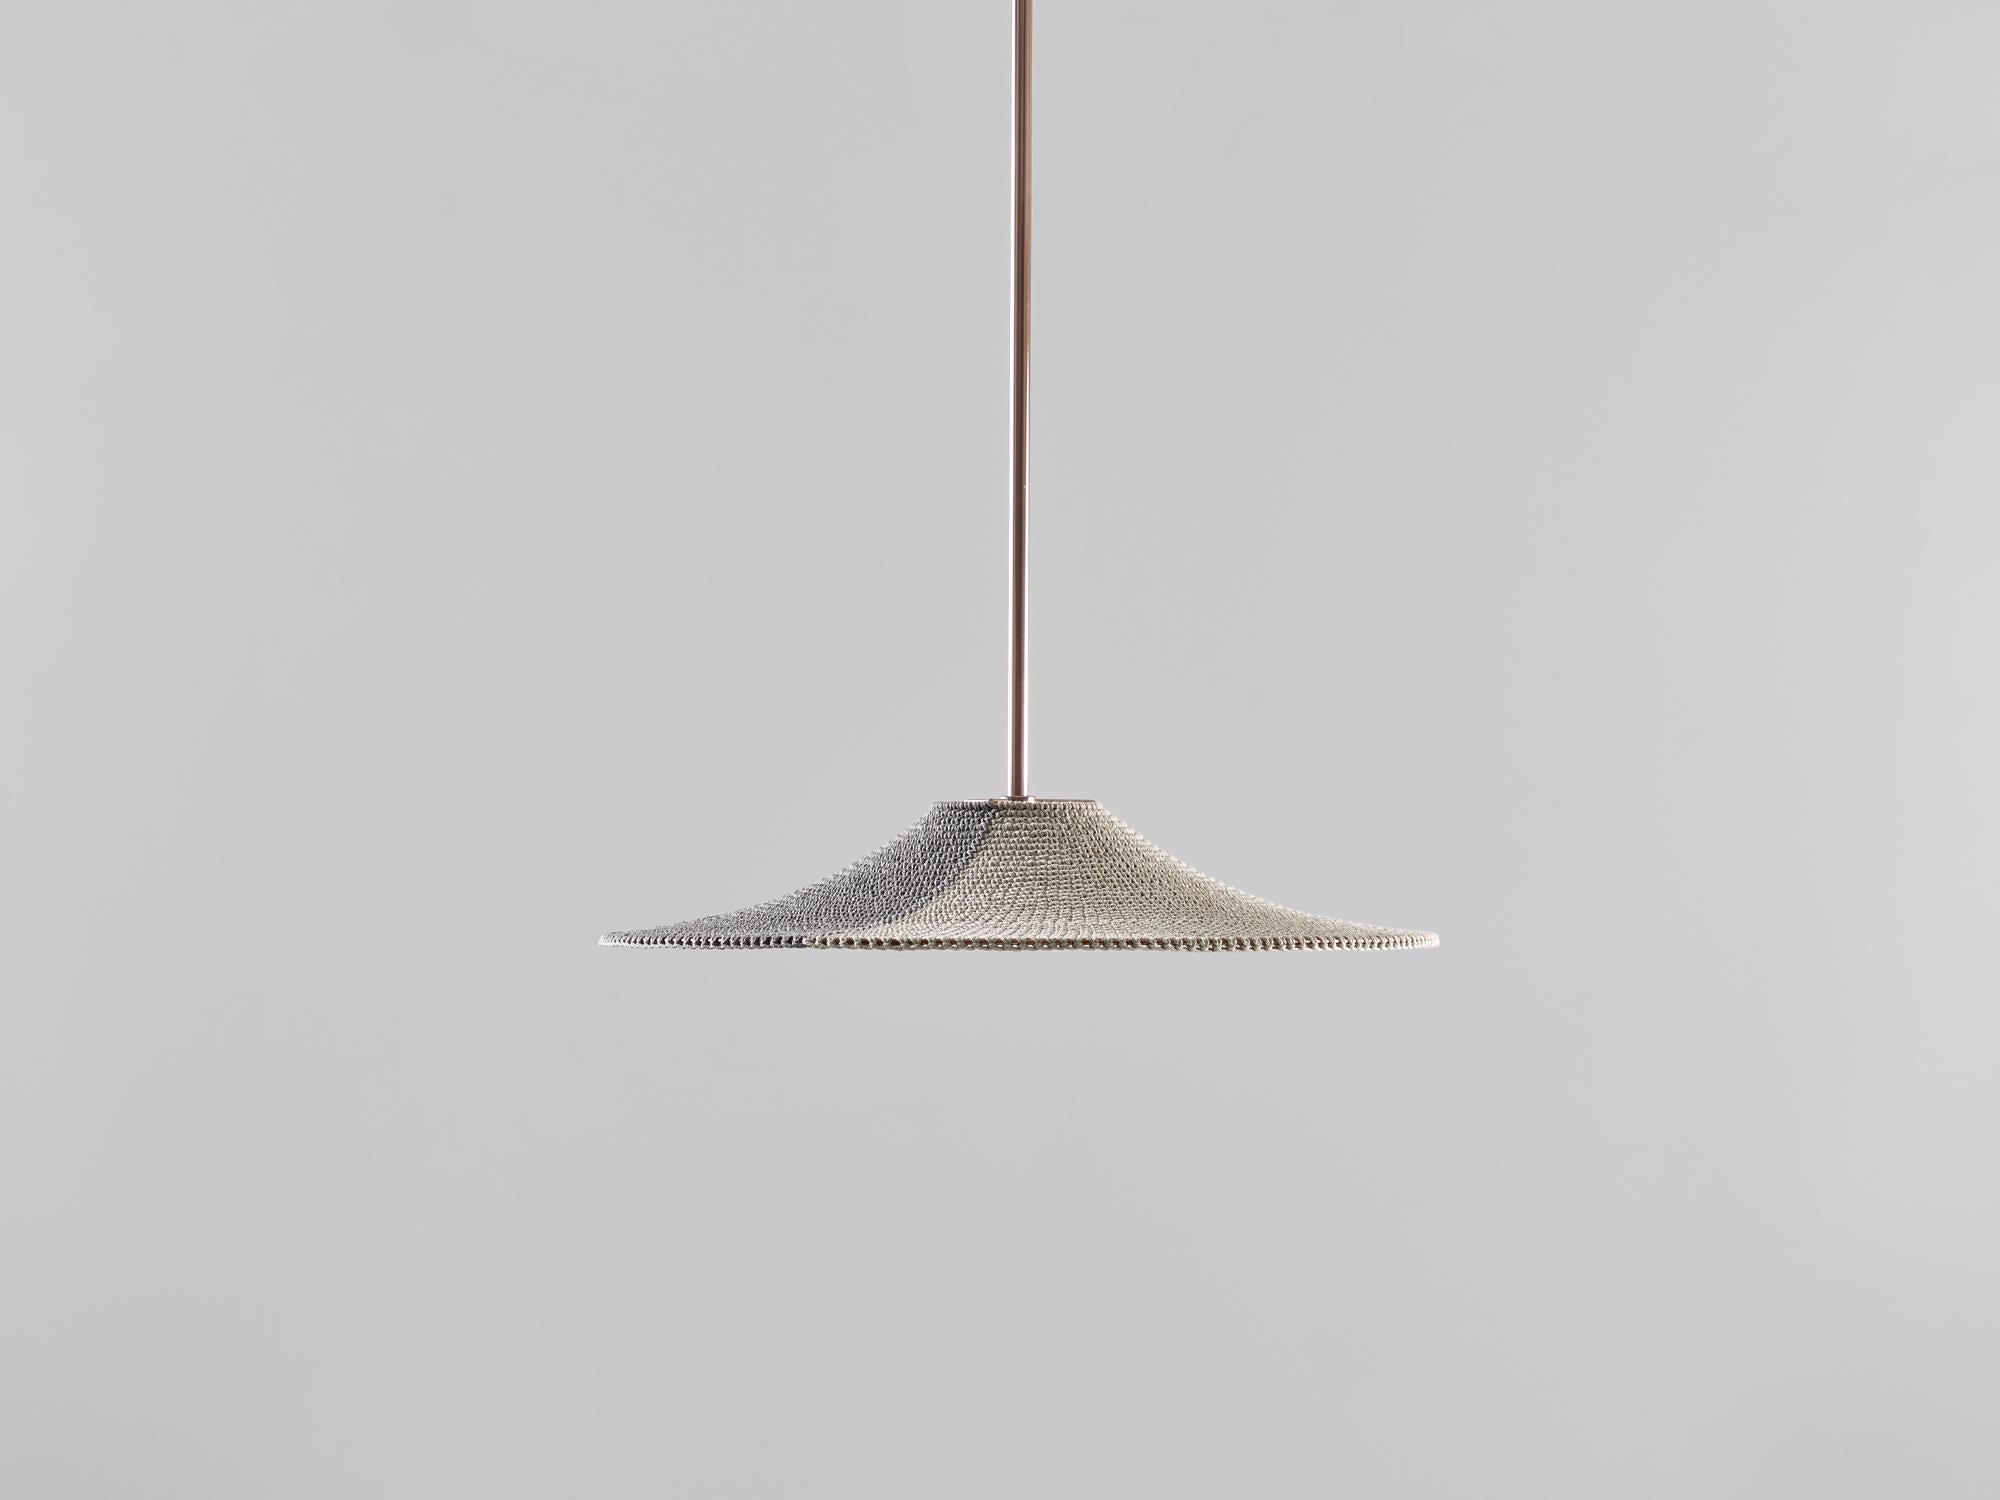 Small Simple Shade 01 50/50 Pendant Lamp by Naomi Paul
Dimensions: D 50 x H 8 cm
Materials: Metal frame, Egyptian cotton cord.
Colors: Down grey and Ecru.
Available in other colors and in 3 sizes: D50, D60, D80 cm.
Available in plain, 50/50, trim or